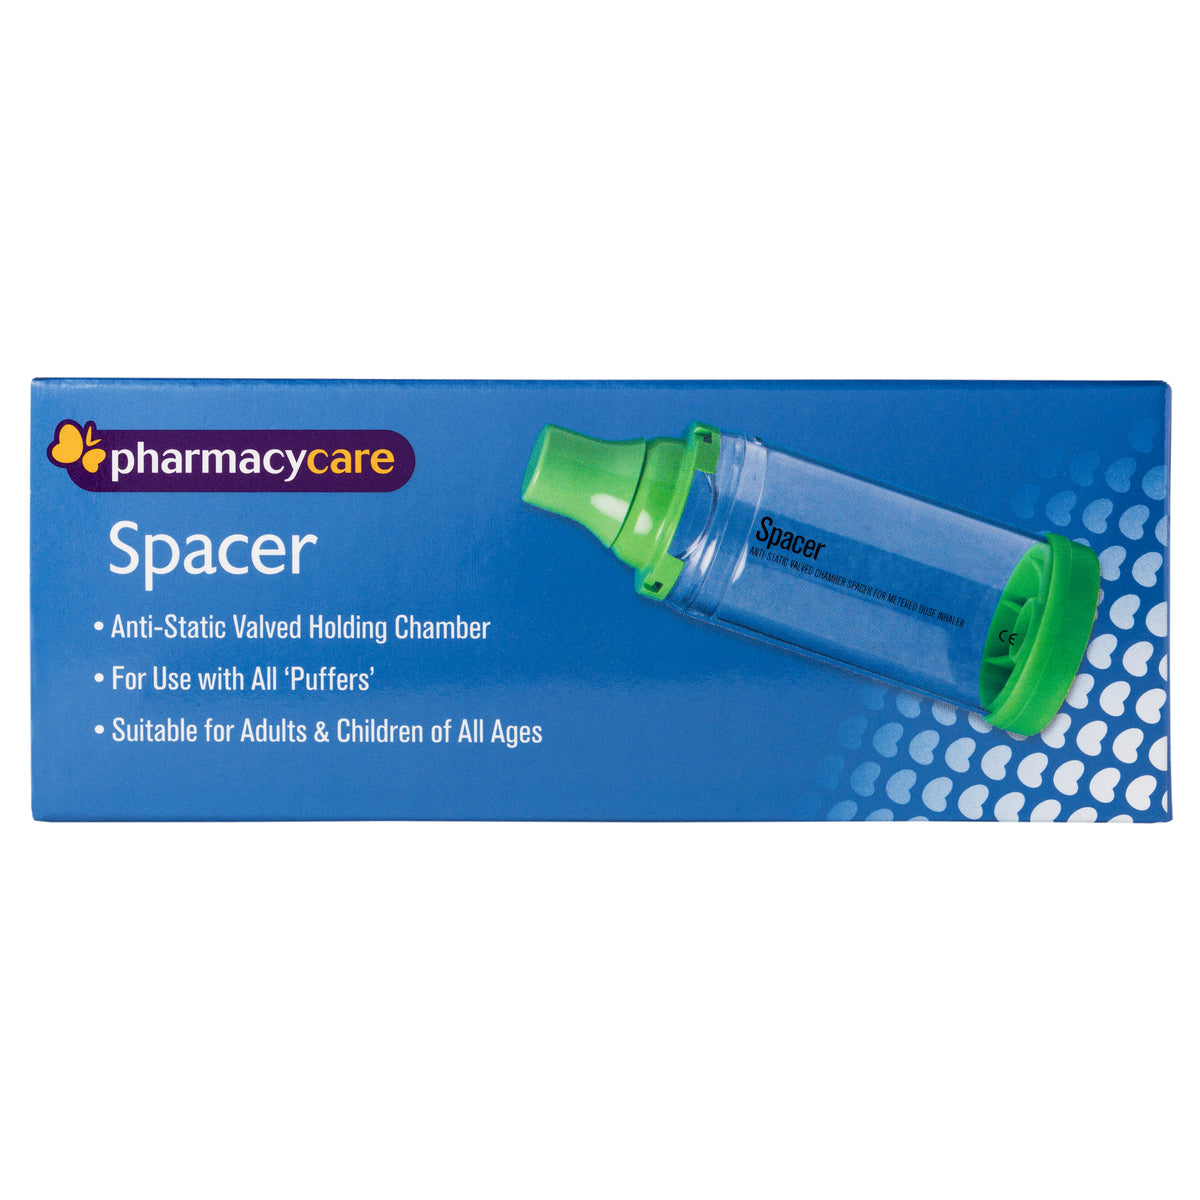 Pharmacy Care Spacer